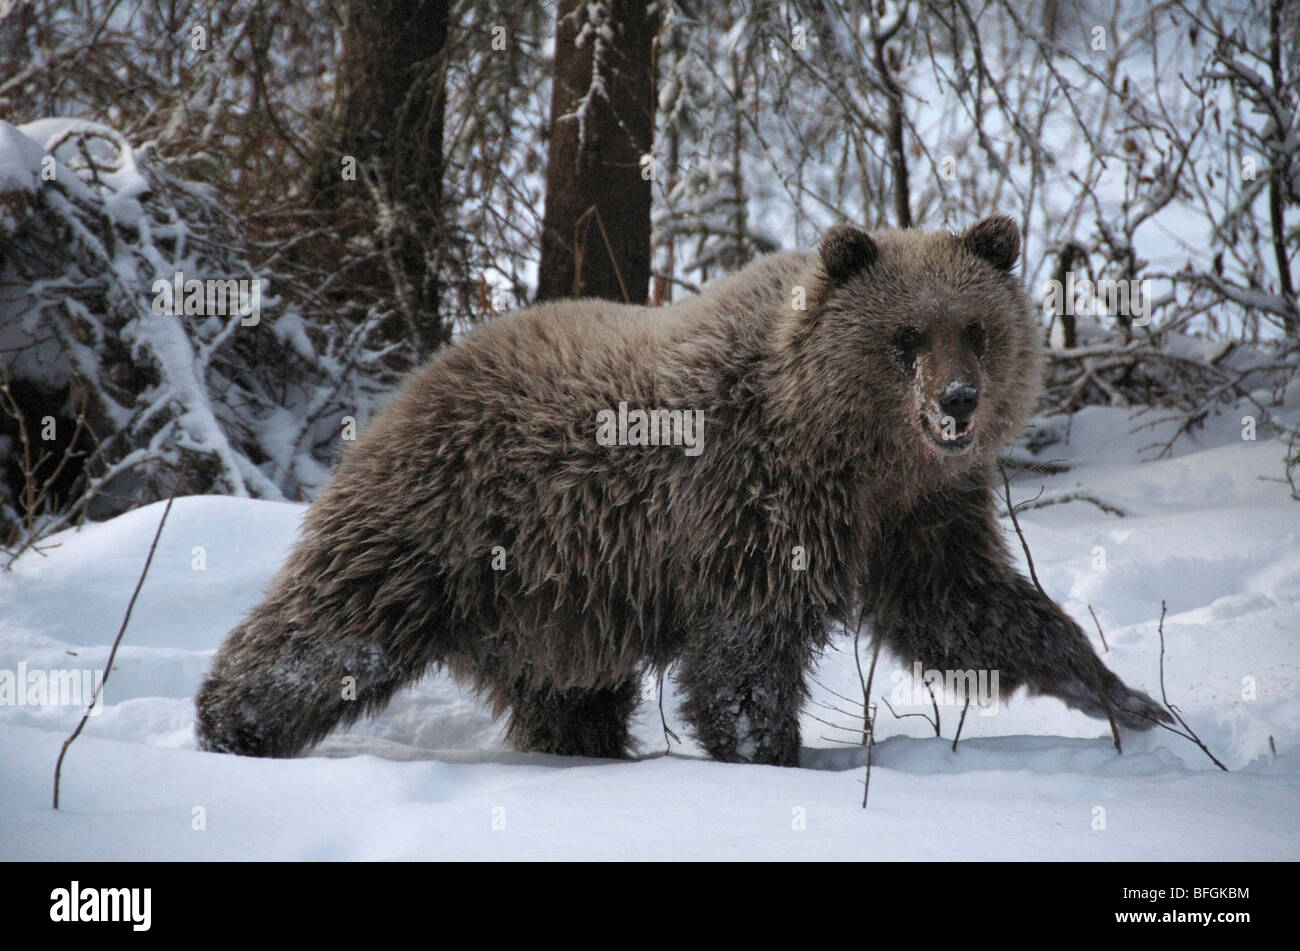 Grizzly Bear (Ursus arctos) in winter. Fishing Branch River, Ni'iinlii Njik Ecological Reserve, Yukon Territory, Canada Stock Photo